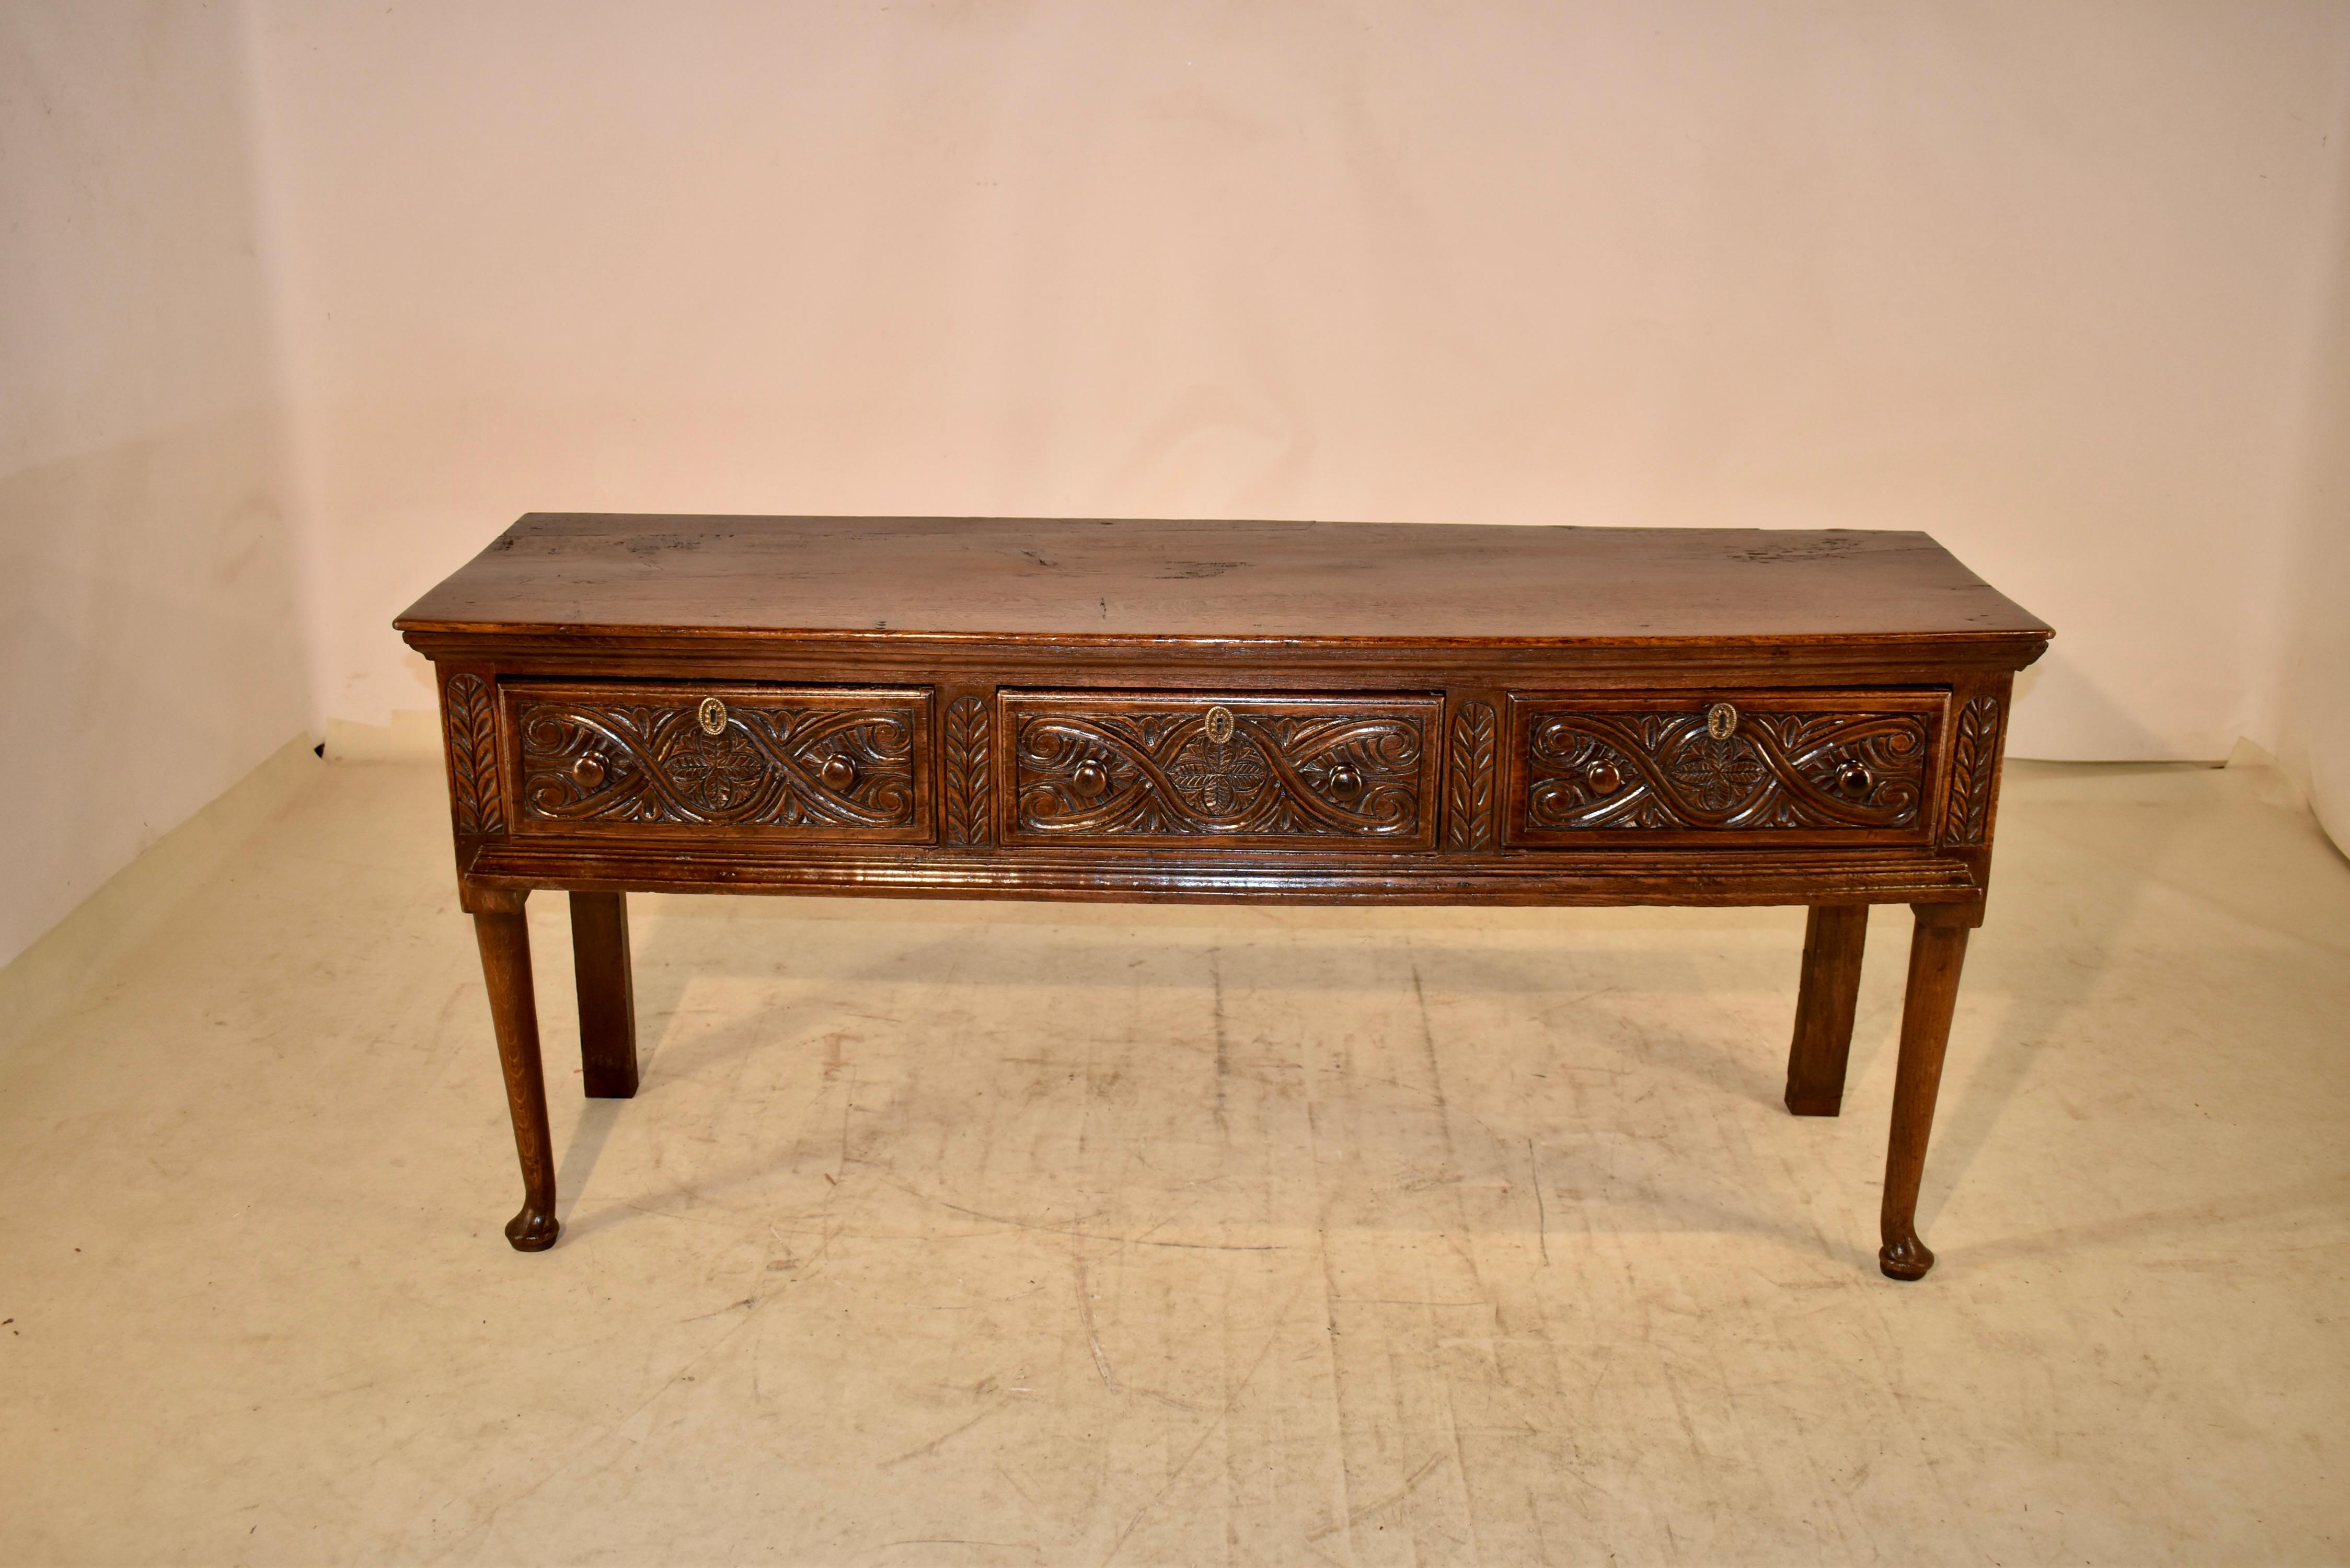 18th century oak sideboard from England. The top is made from one solid plank, and has been added to in the back corner, either for repair or possibly original. The top follows down to simple sides and three drawers in the front, all with hand